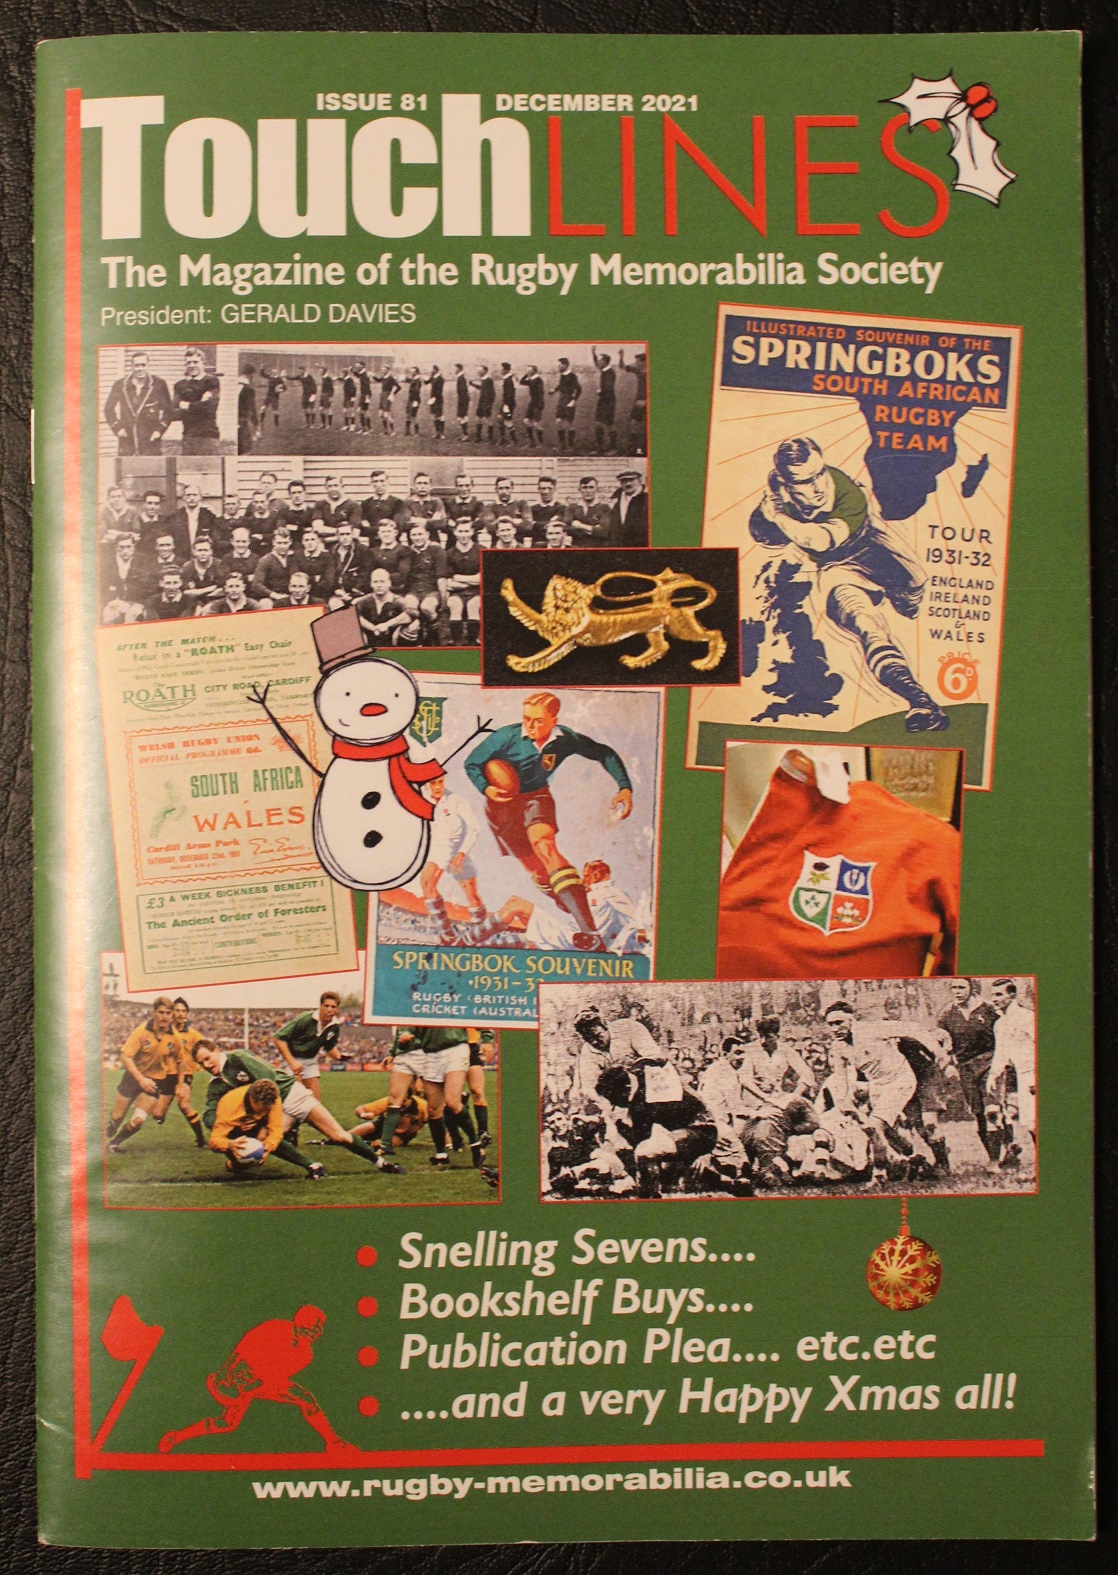 Touchlines - Issue 81 - December 2021 - Rugby Memorabilia Society.jpg